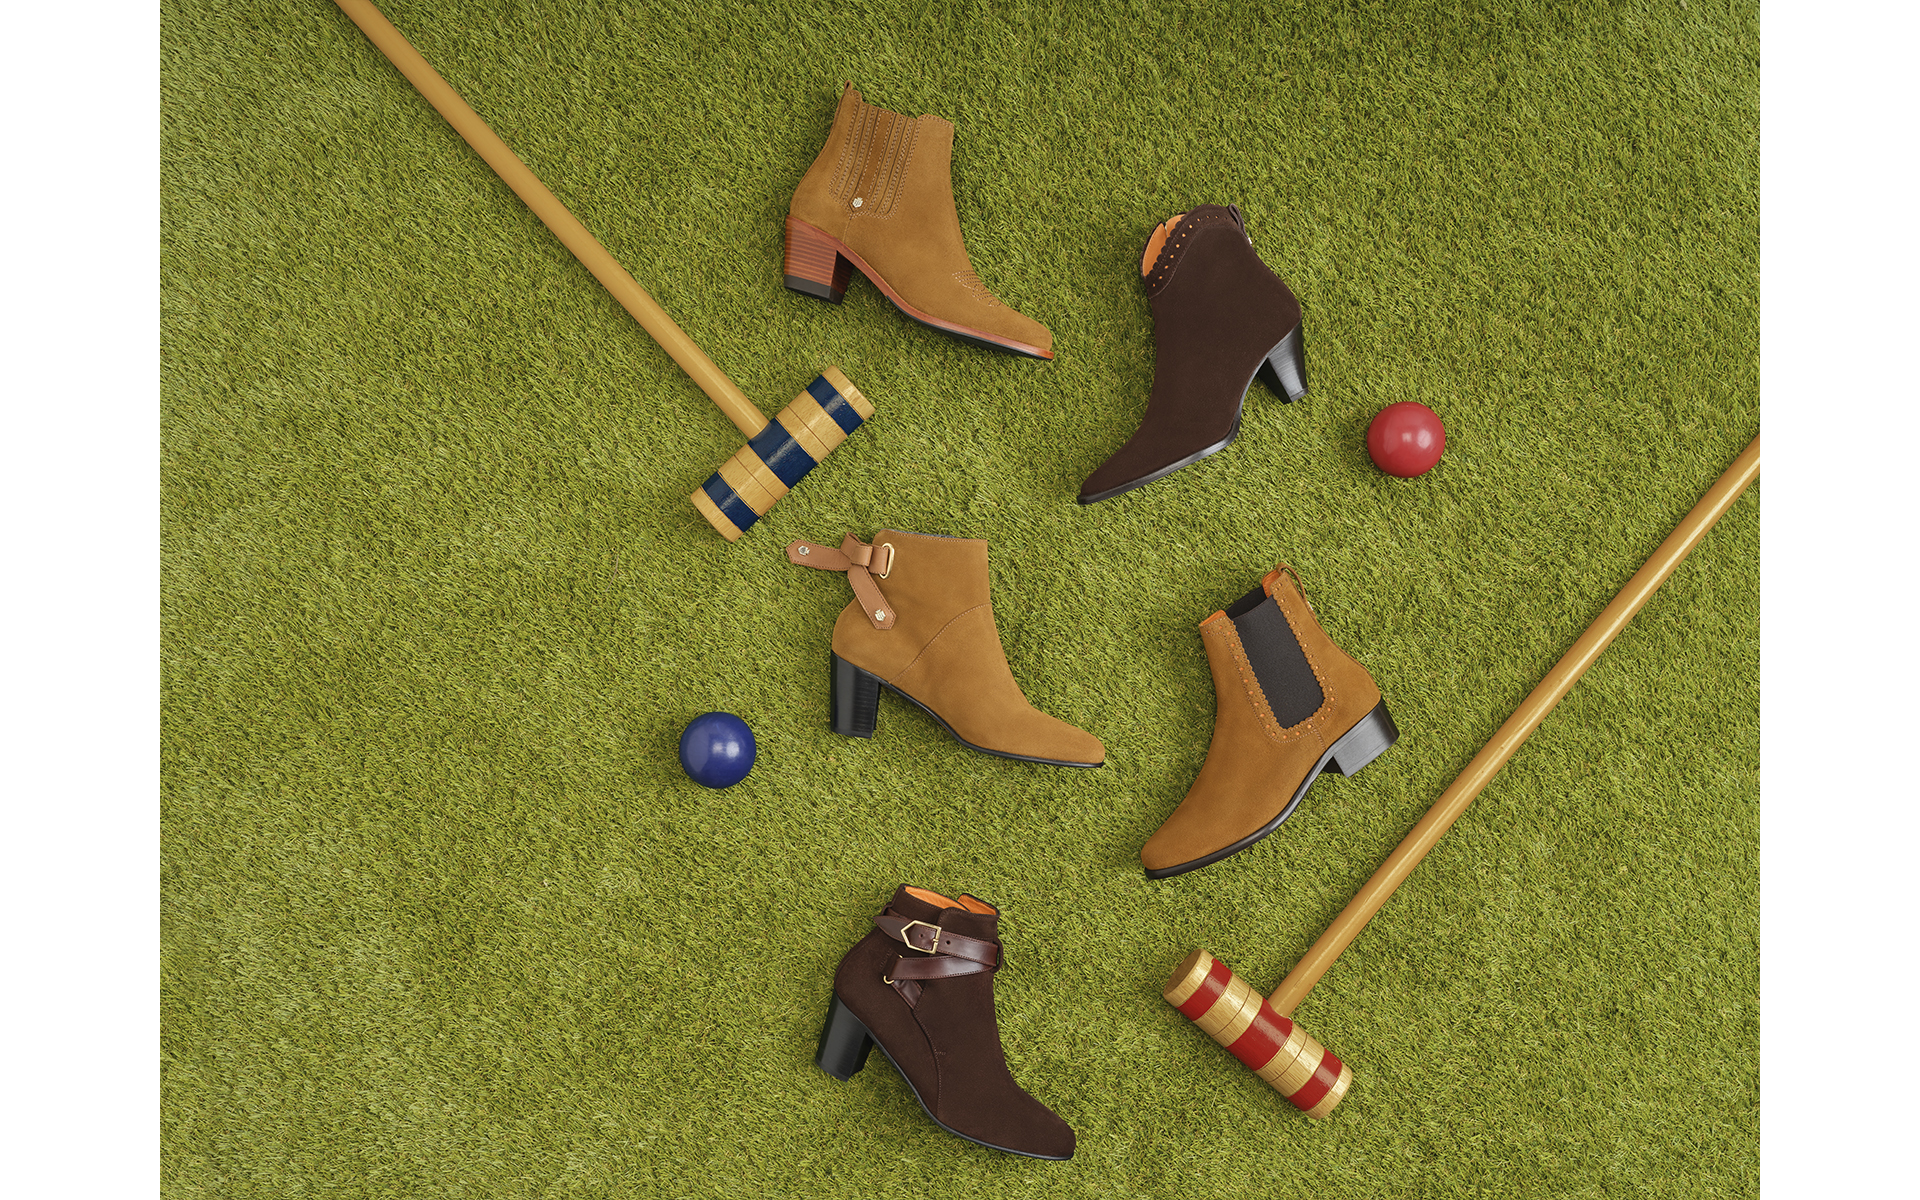 Summer photo shoot shoes sitting on grass with a croquet stick as flat lay brand photo shoot